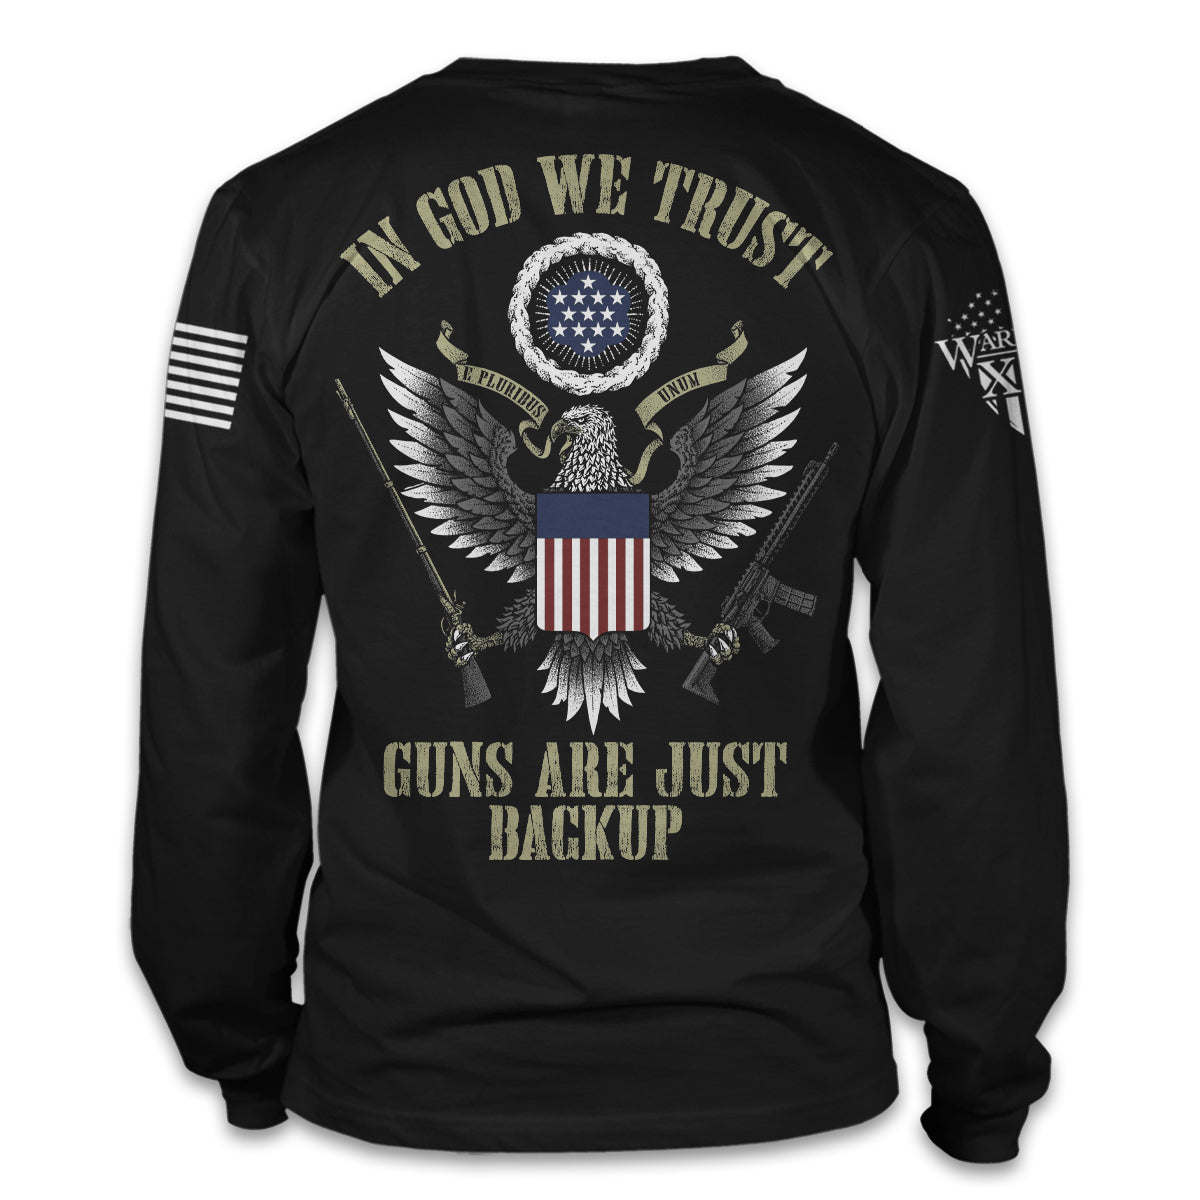 A black long sleeve shirt with the words "In God we trust, guns are just backup" with an american eagle and the USA flag printed on the back of the shirt.